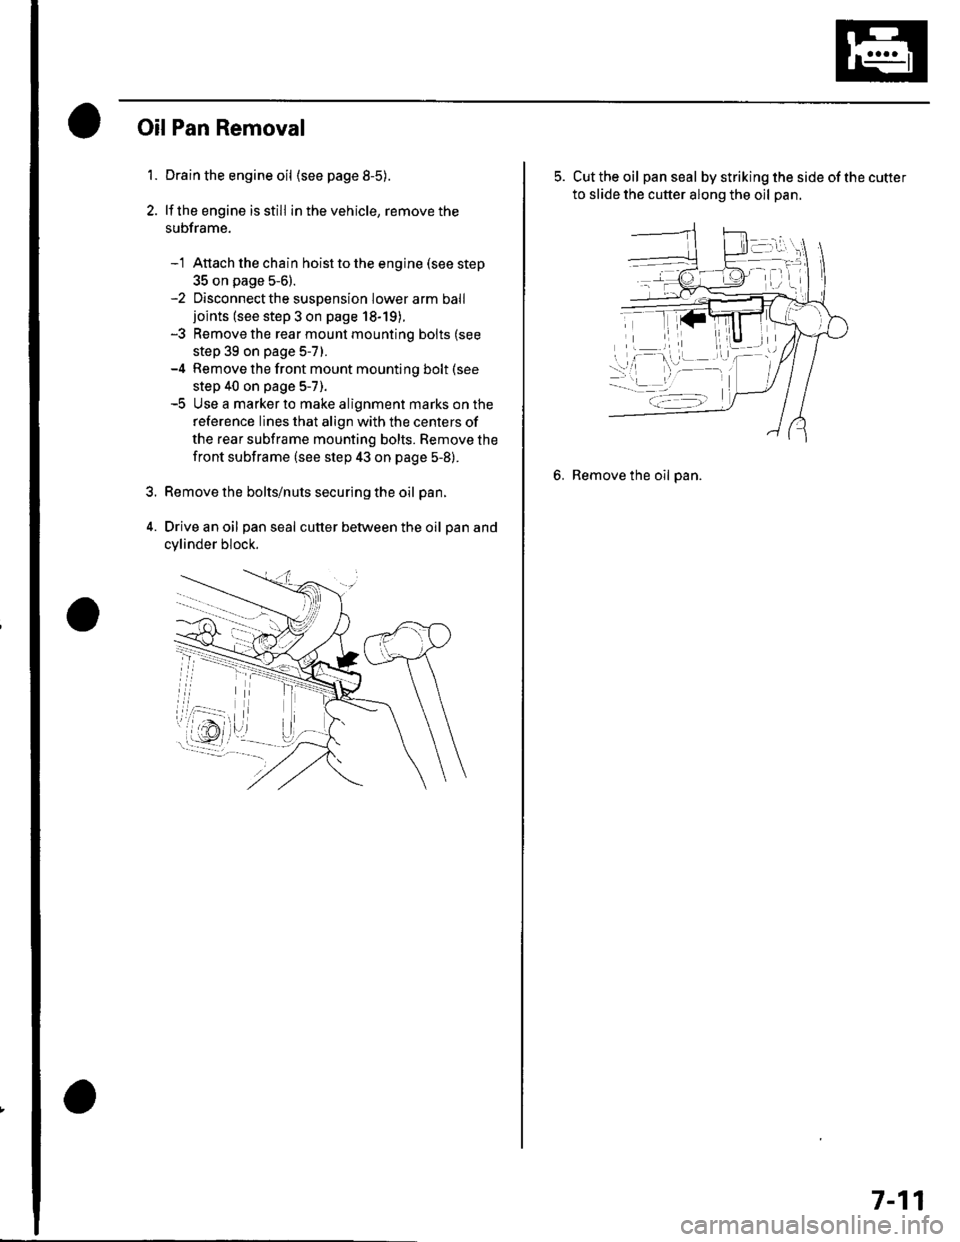 HONDA CIVIC 2003 7.G Owners Manual 1.
OilPan Removal
Drain the engine oil (see page 8-5).
lf the engine is still in the vehicle, remove the
subframe.
-1 Attach the chain hoist to the engine (see step
35 on page 5-6).-2 Disconnectthe su